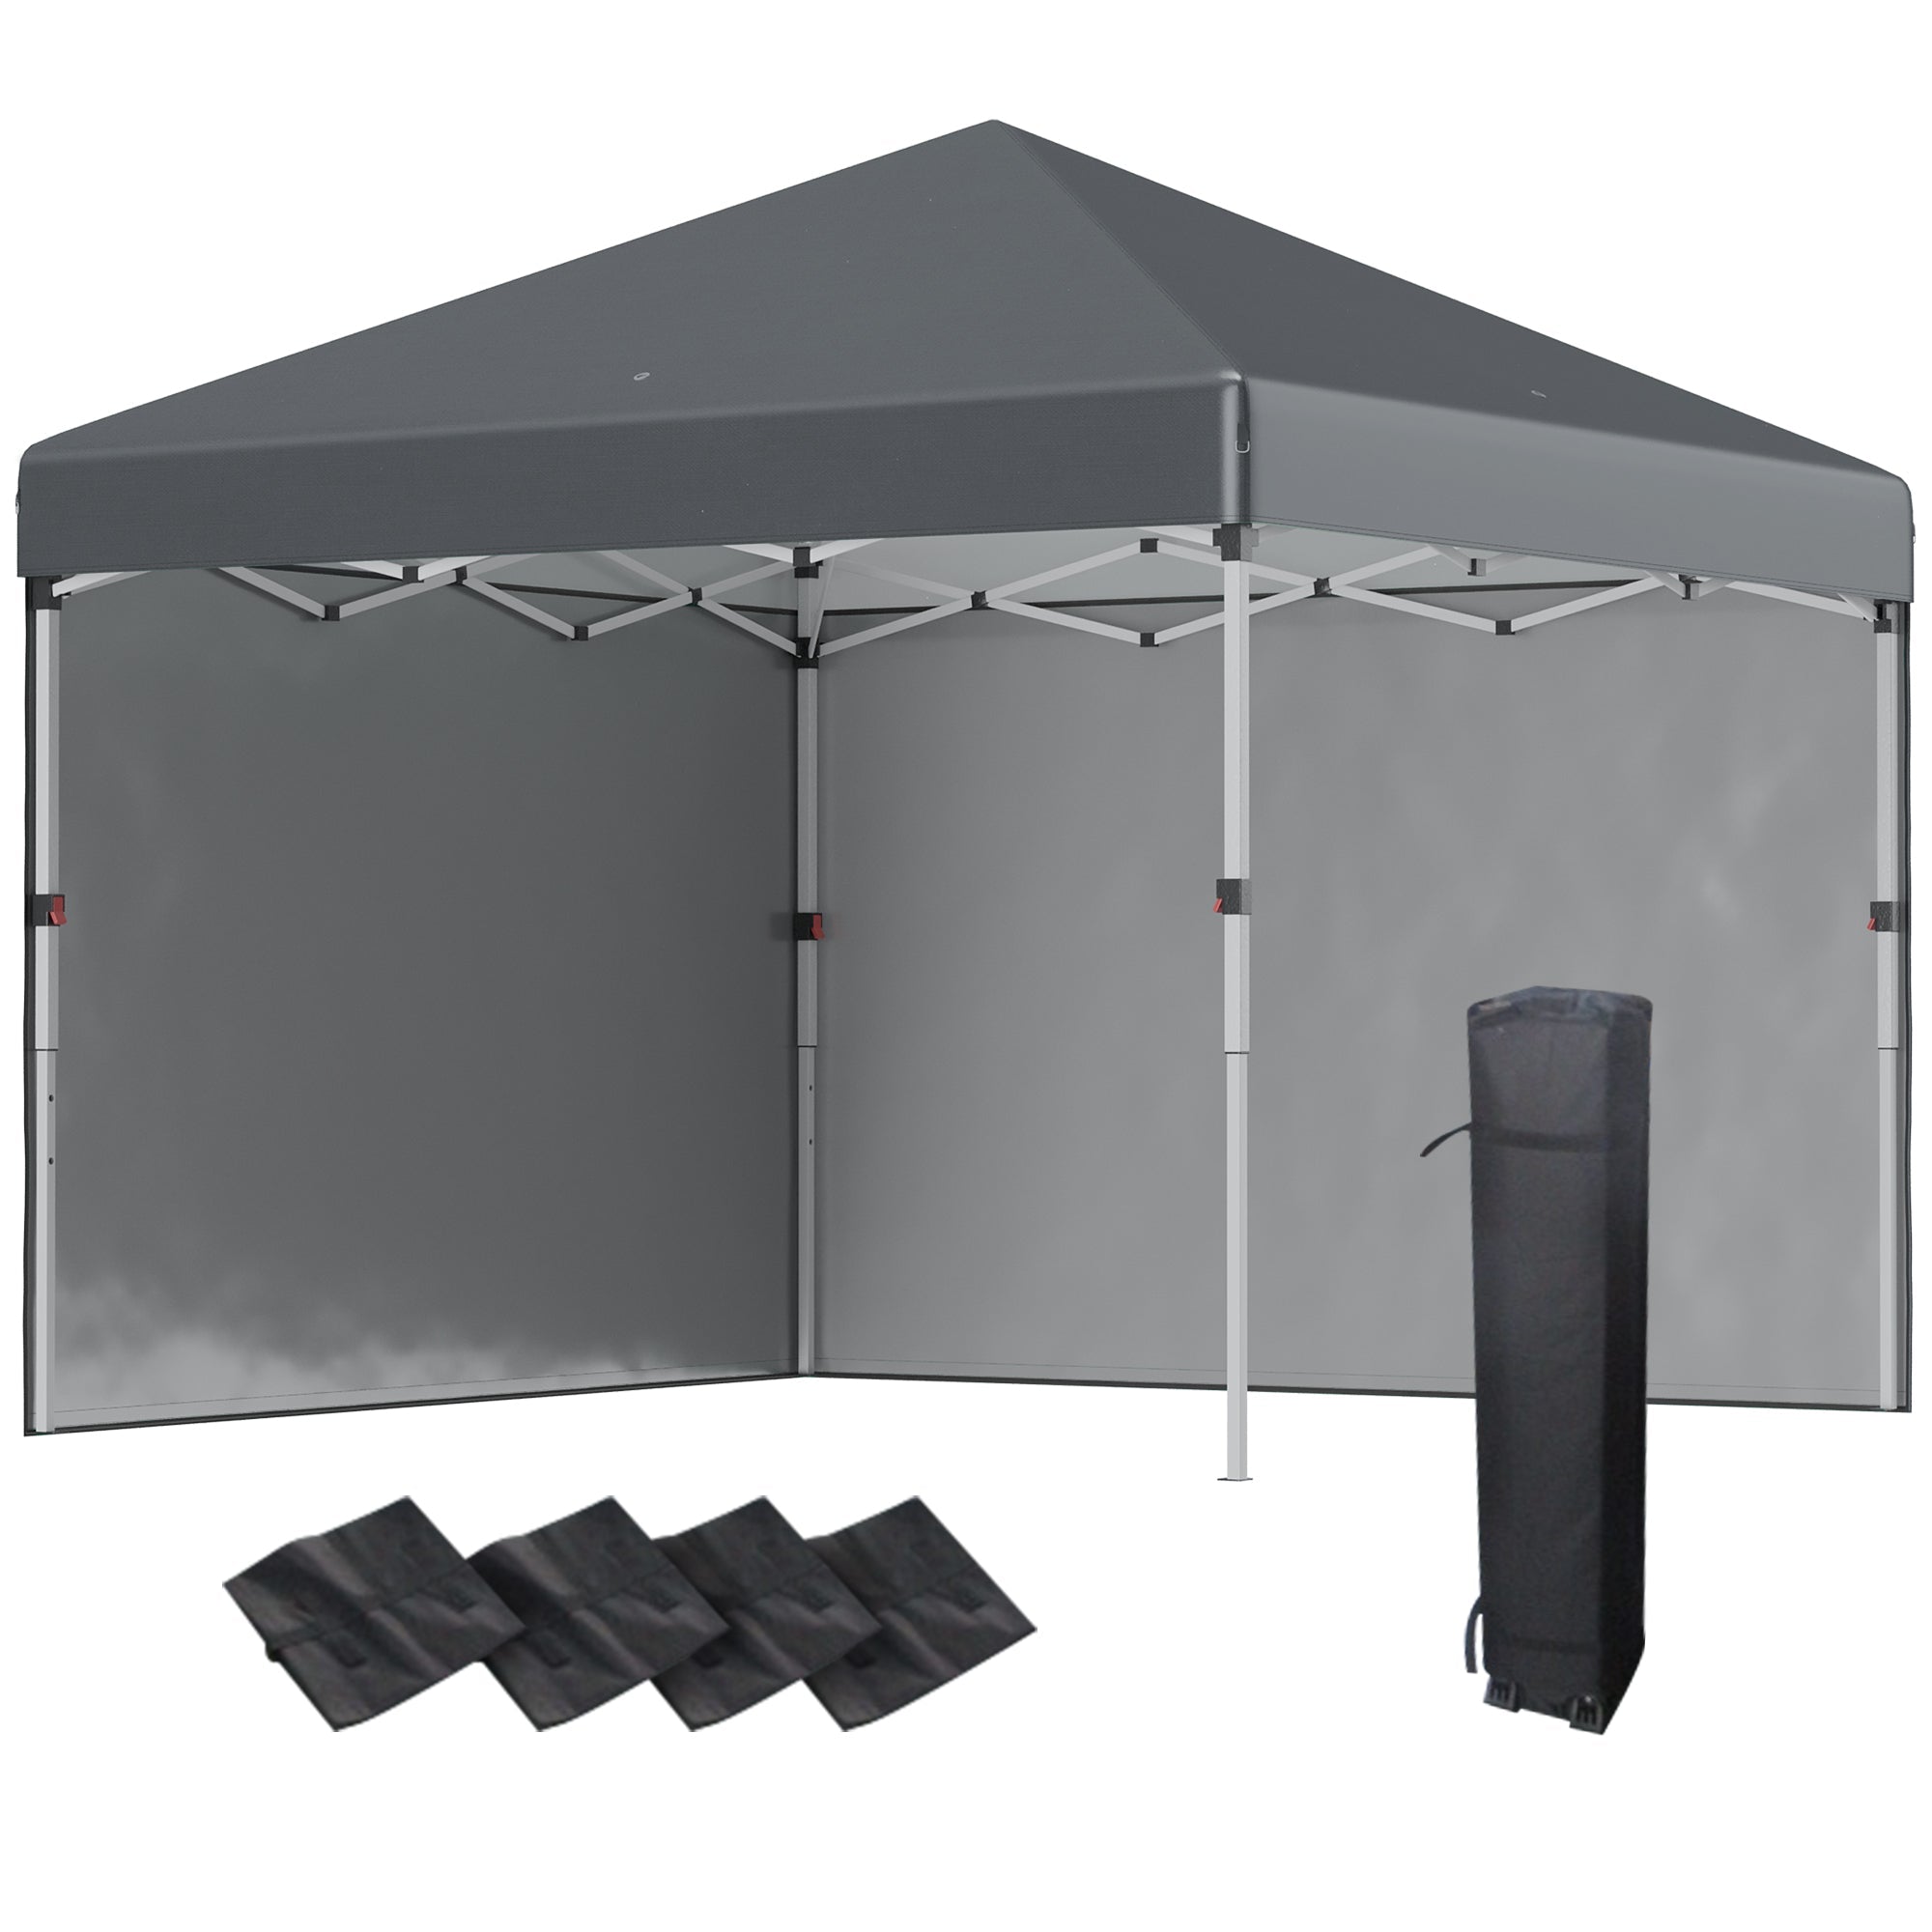 3 x 3 (M) Pop Up Gazebo with 2 Sidewalls, Leg Weight Bags and Carry Bag, Height Adjustable Party Tent Event Shelter for Garden, Dark Grey-0